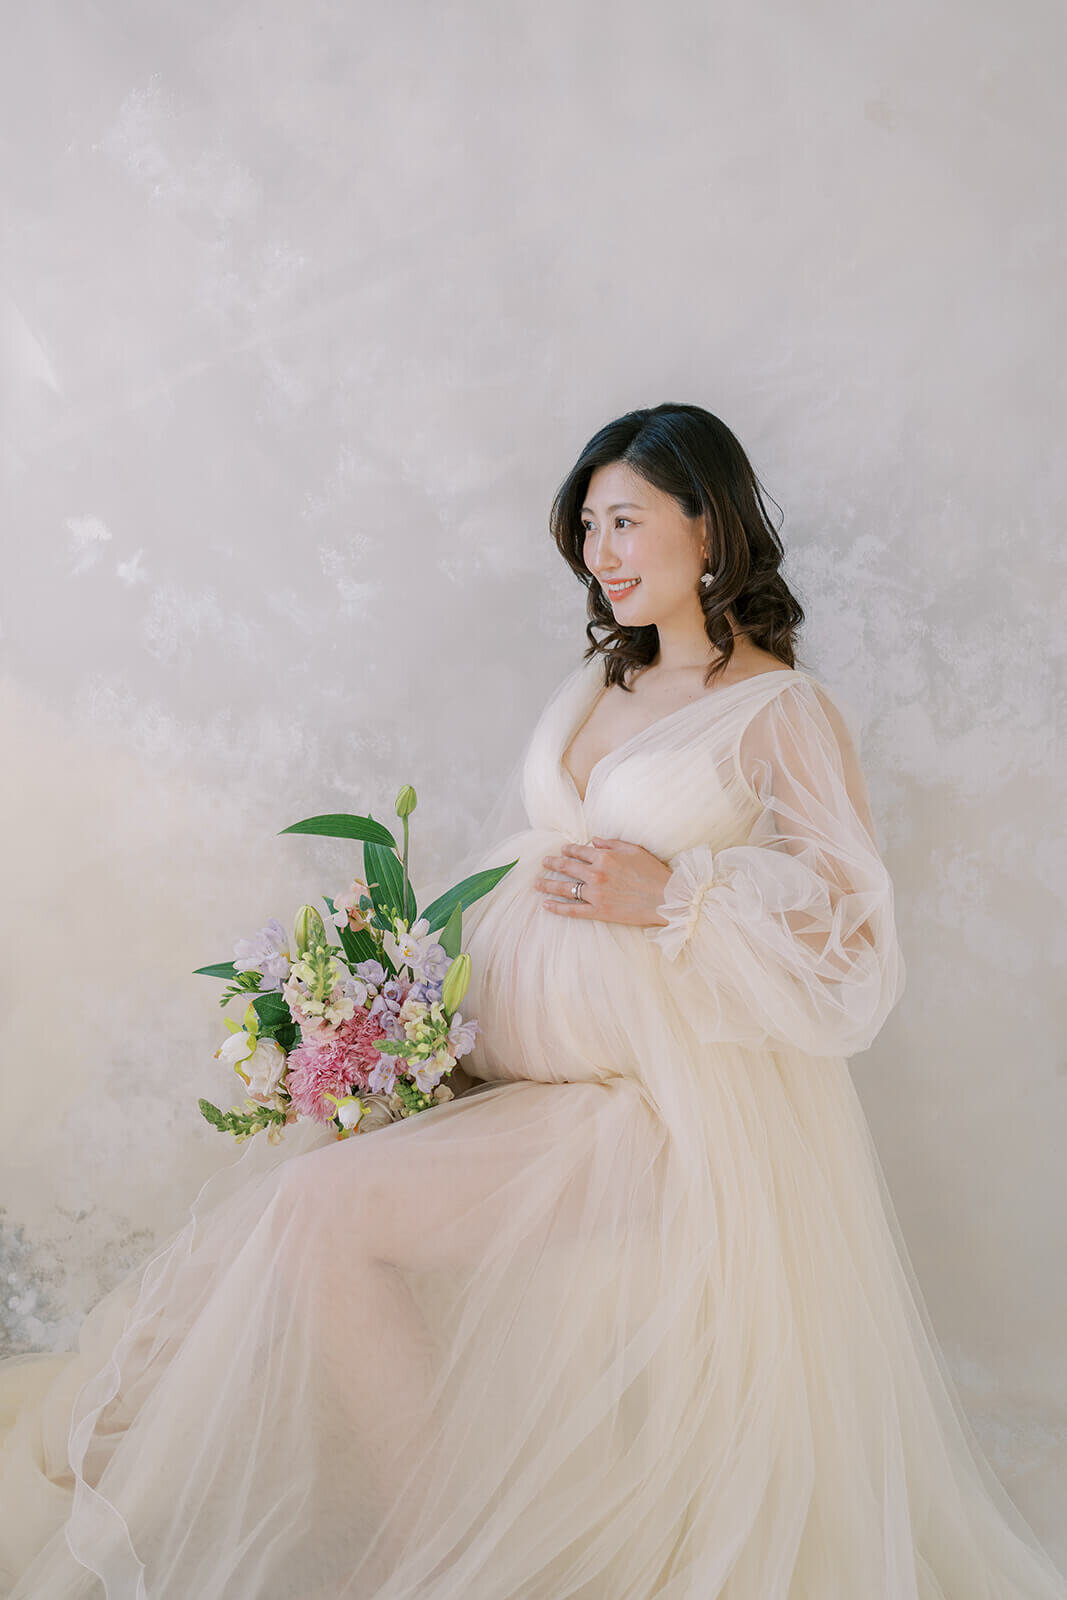 Celebrate pregnancy's grace with an Asian mum of Chinese descent, resplendent in a cream tulle gown, at a Gold Coast maternity shoot